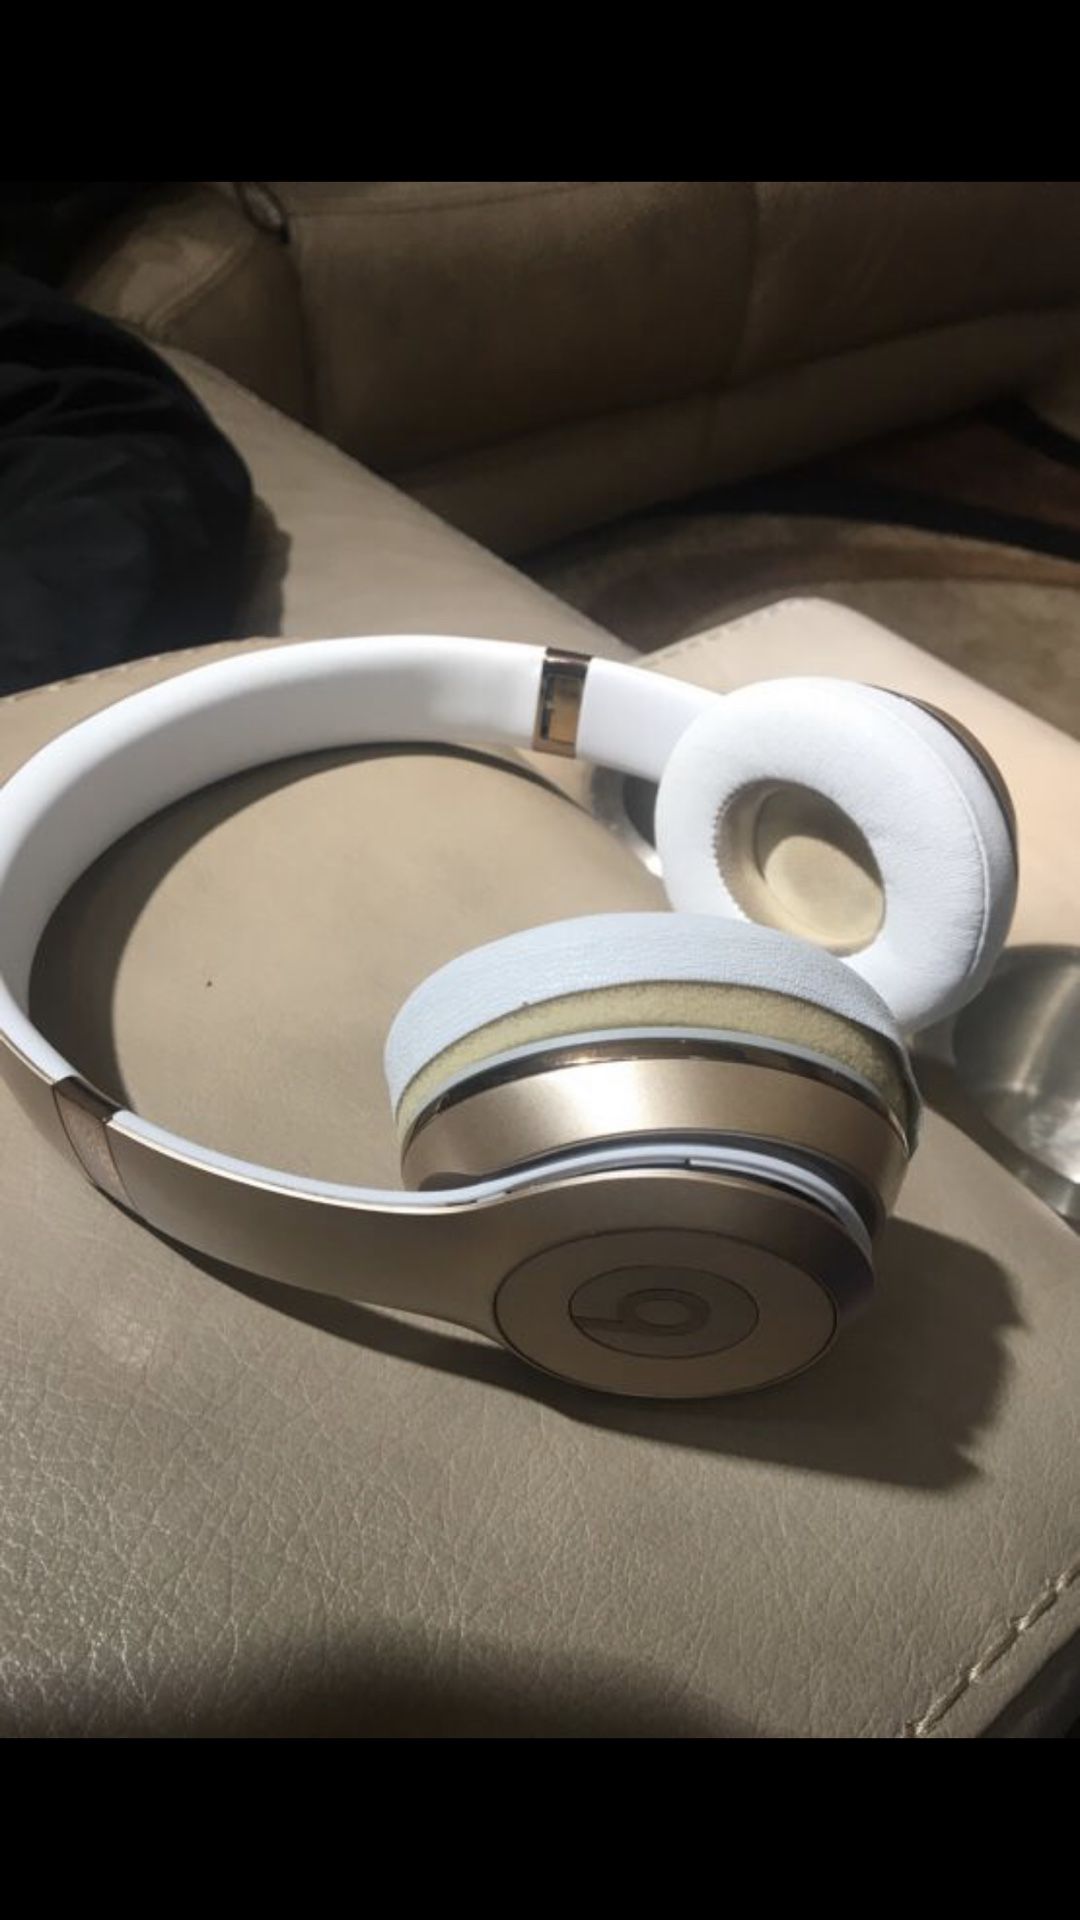 Beats solo 3 (work with cord)